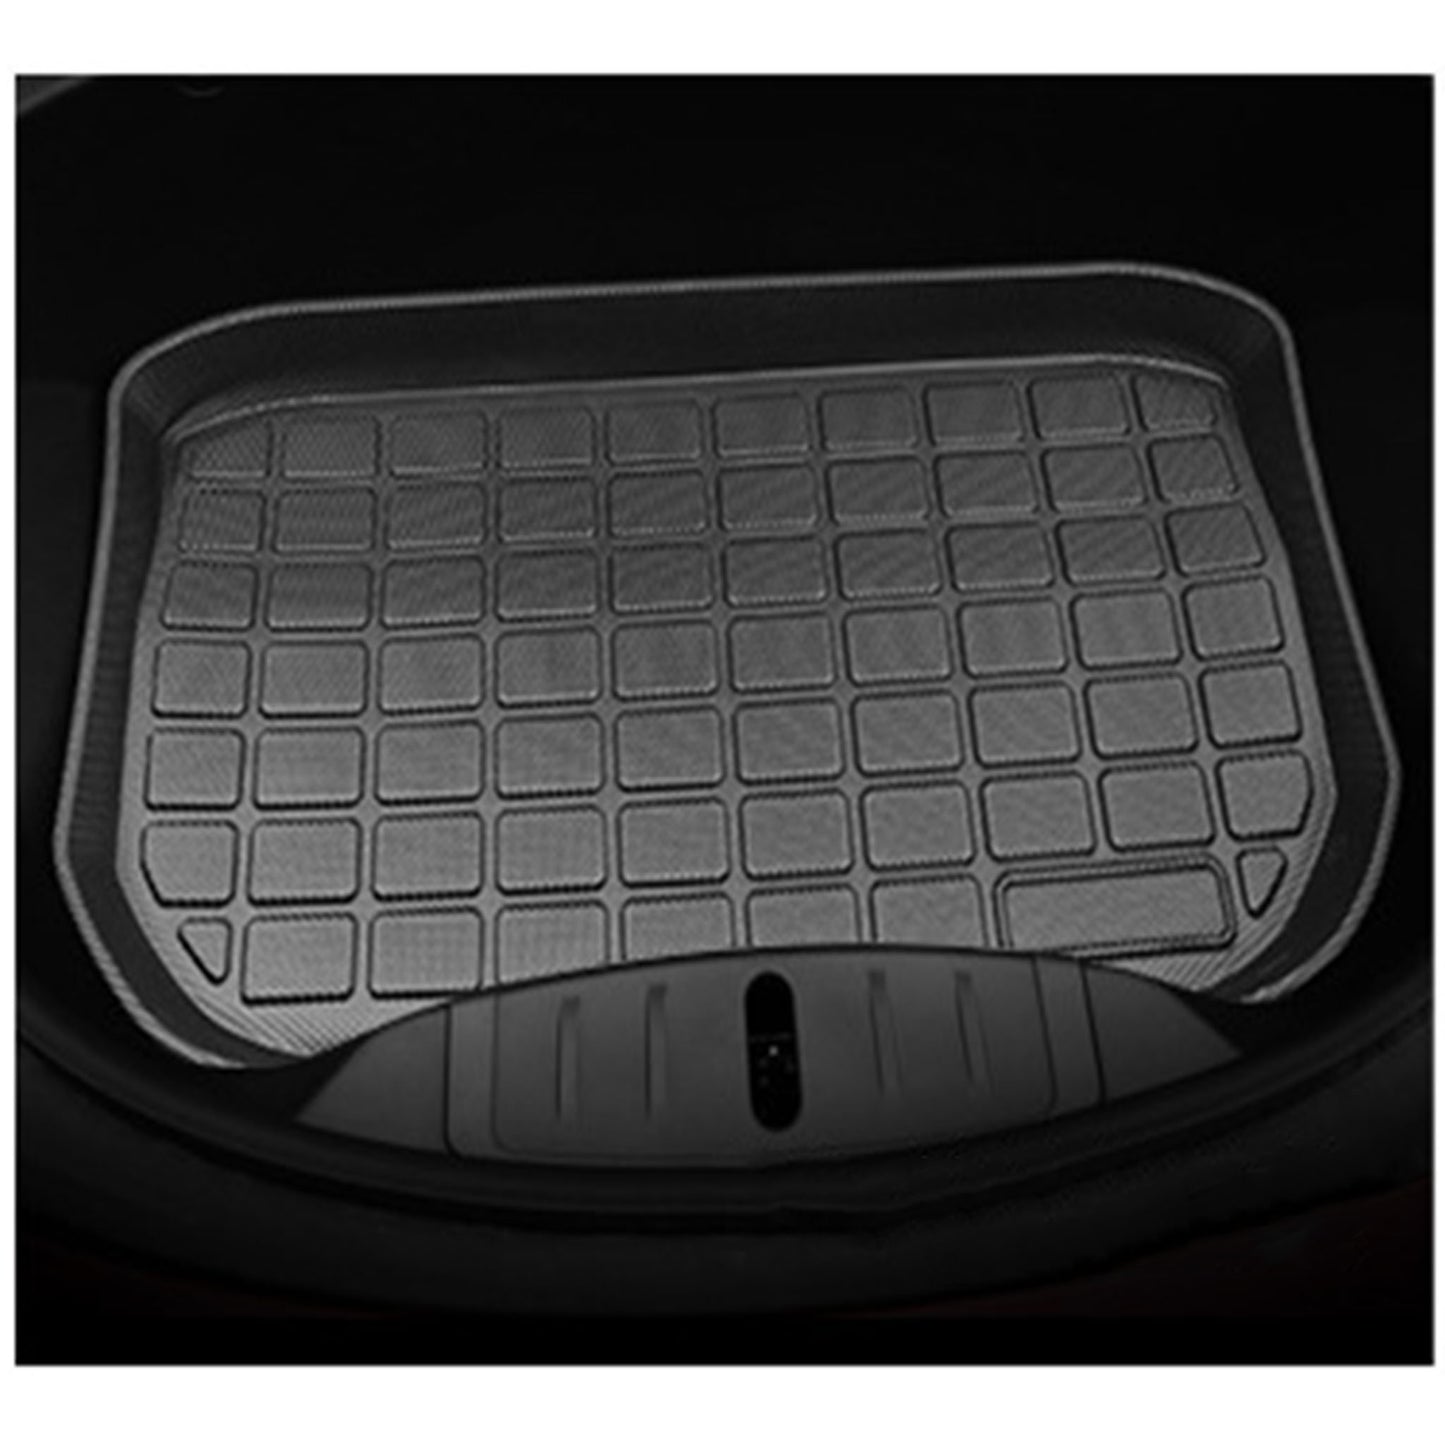 Model 3 Front Rear Trunk Well Mats-Vehicles & Parts-Yeslak